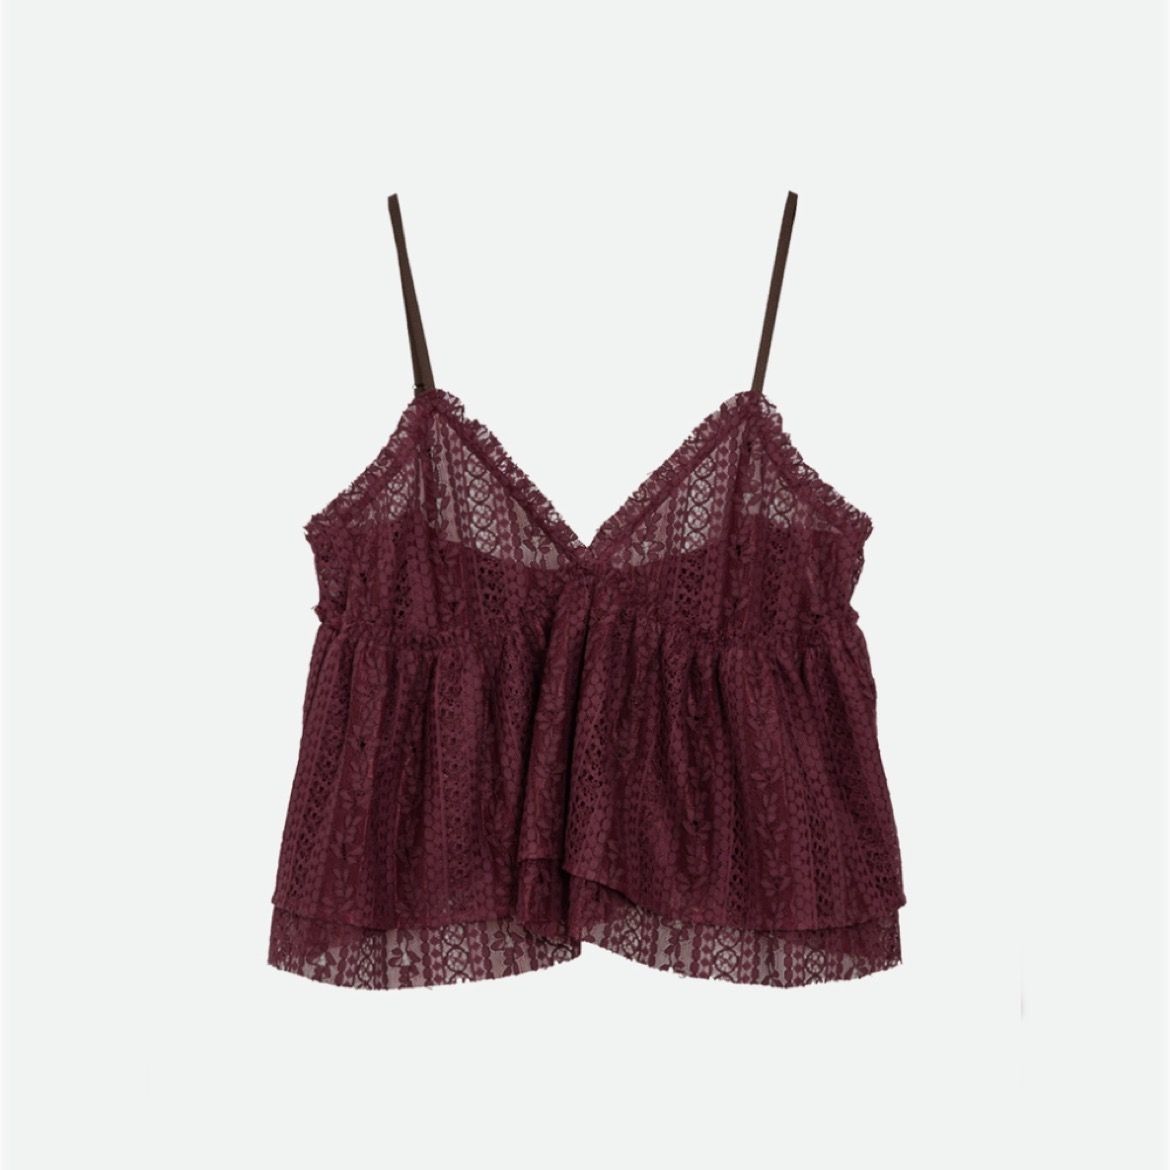 NOUNLESS - 【残り一点】Sheer Lace Cami Tops | ACRMTSM ONLINE STORE